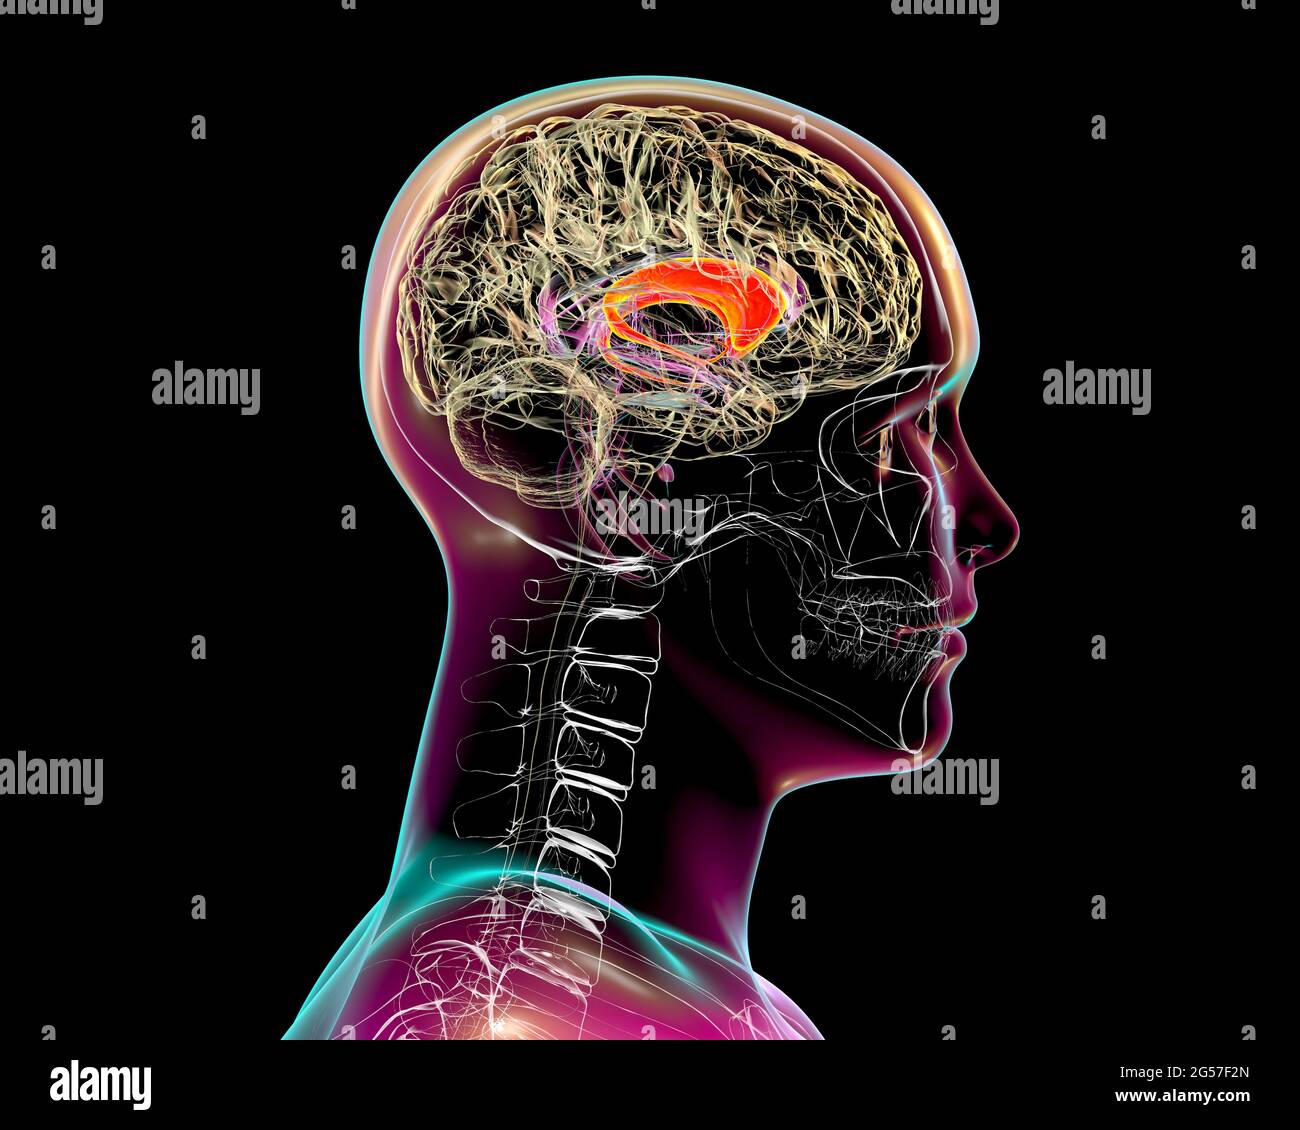 Caudate nuclei highlighted in the human brain, illustration Stock Photo